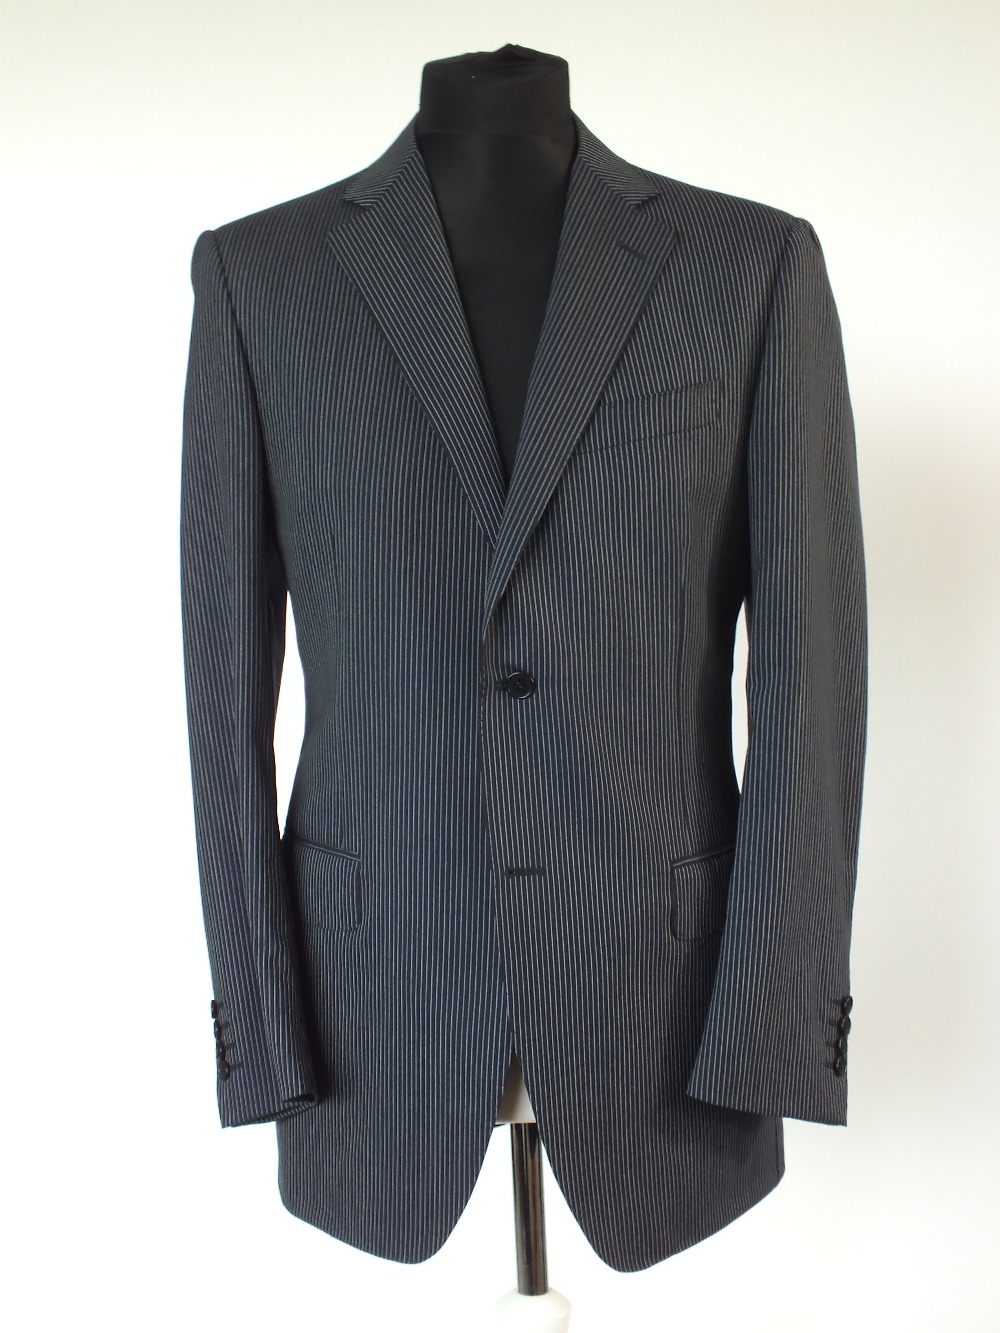 A Canali suit, navy pinstripe, single vent, Italian size 50R, 100% wool, flat front to trousers